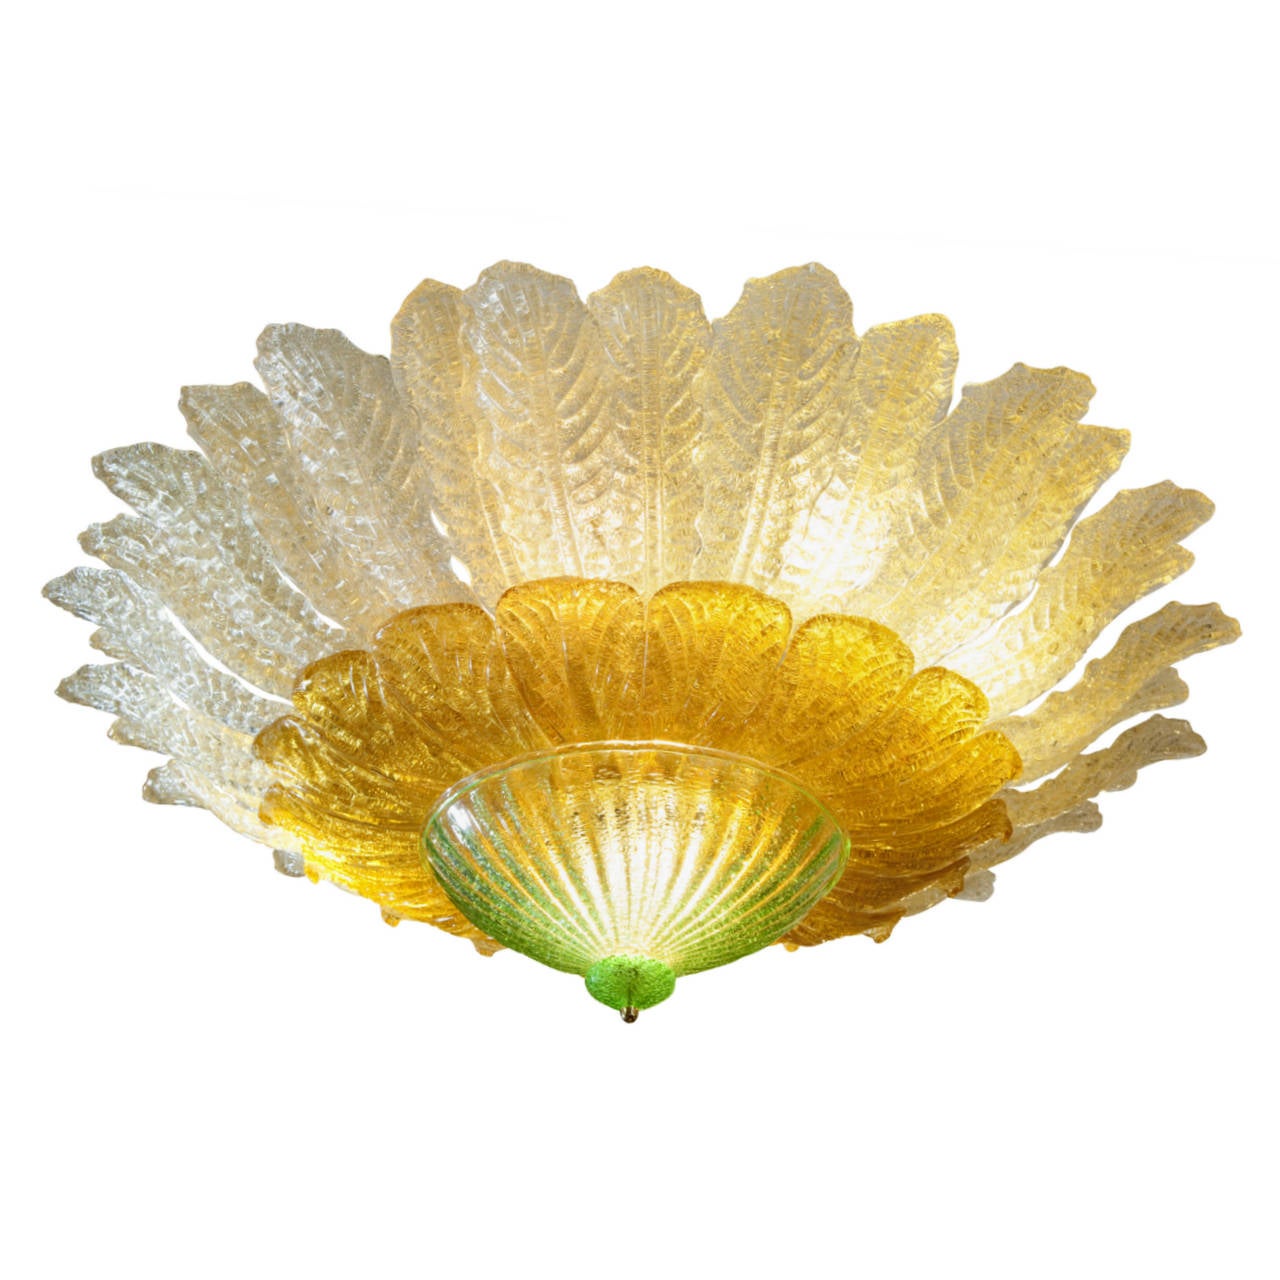 Venetian Barovier and Toso Murano glass fourteen-light fixture. This handblown and colored Murano glass chandelier is a one of a kind custom-made piece, produced in the 1970s.